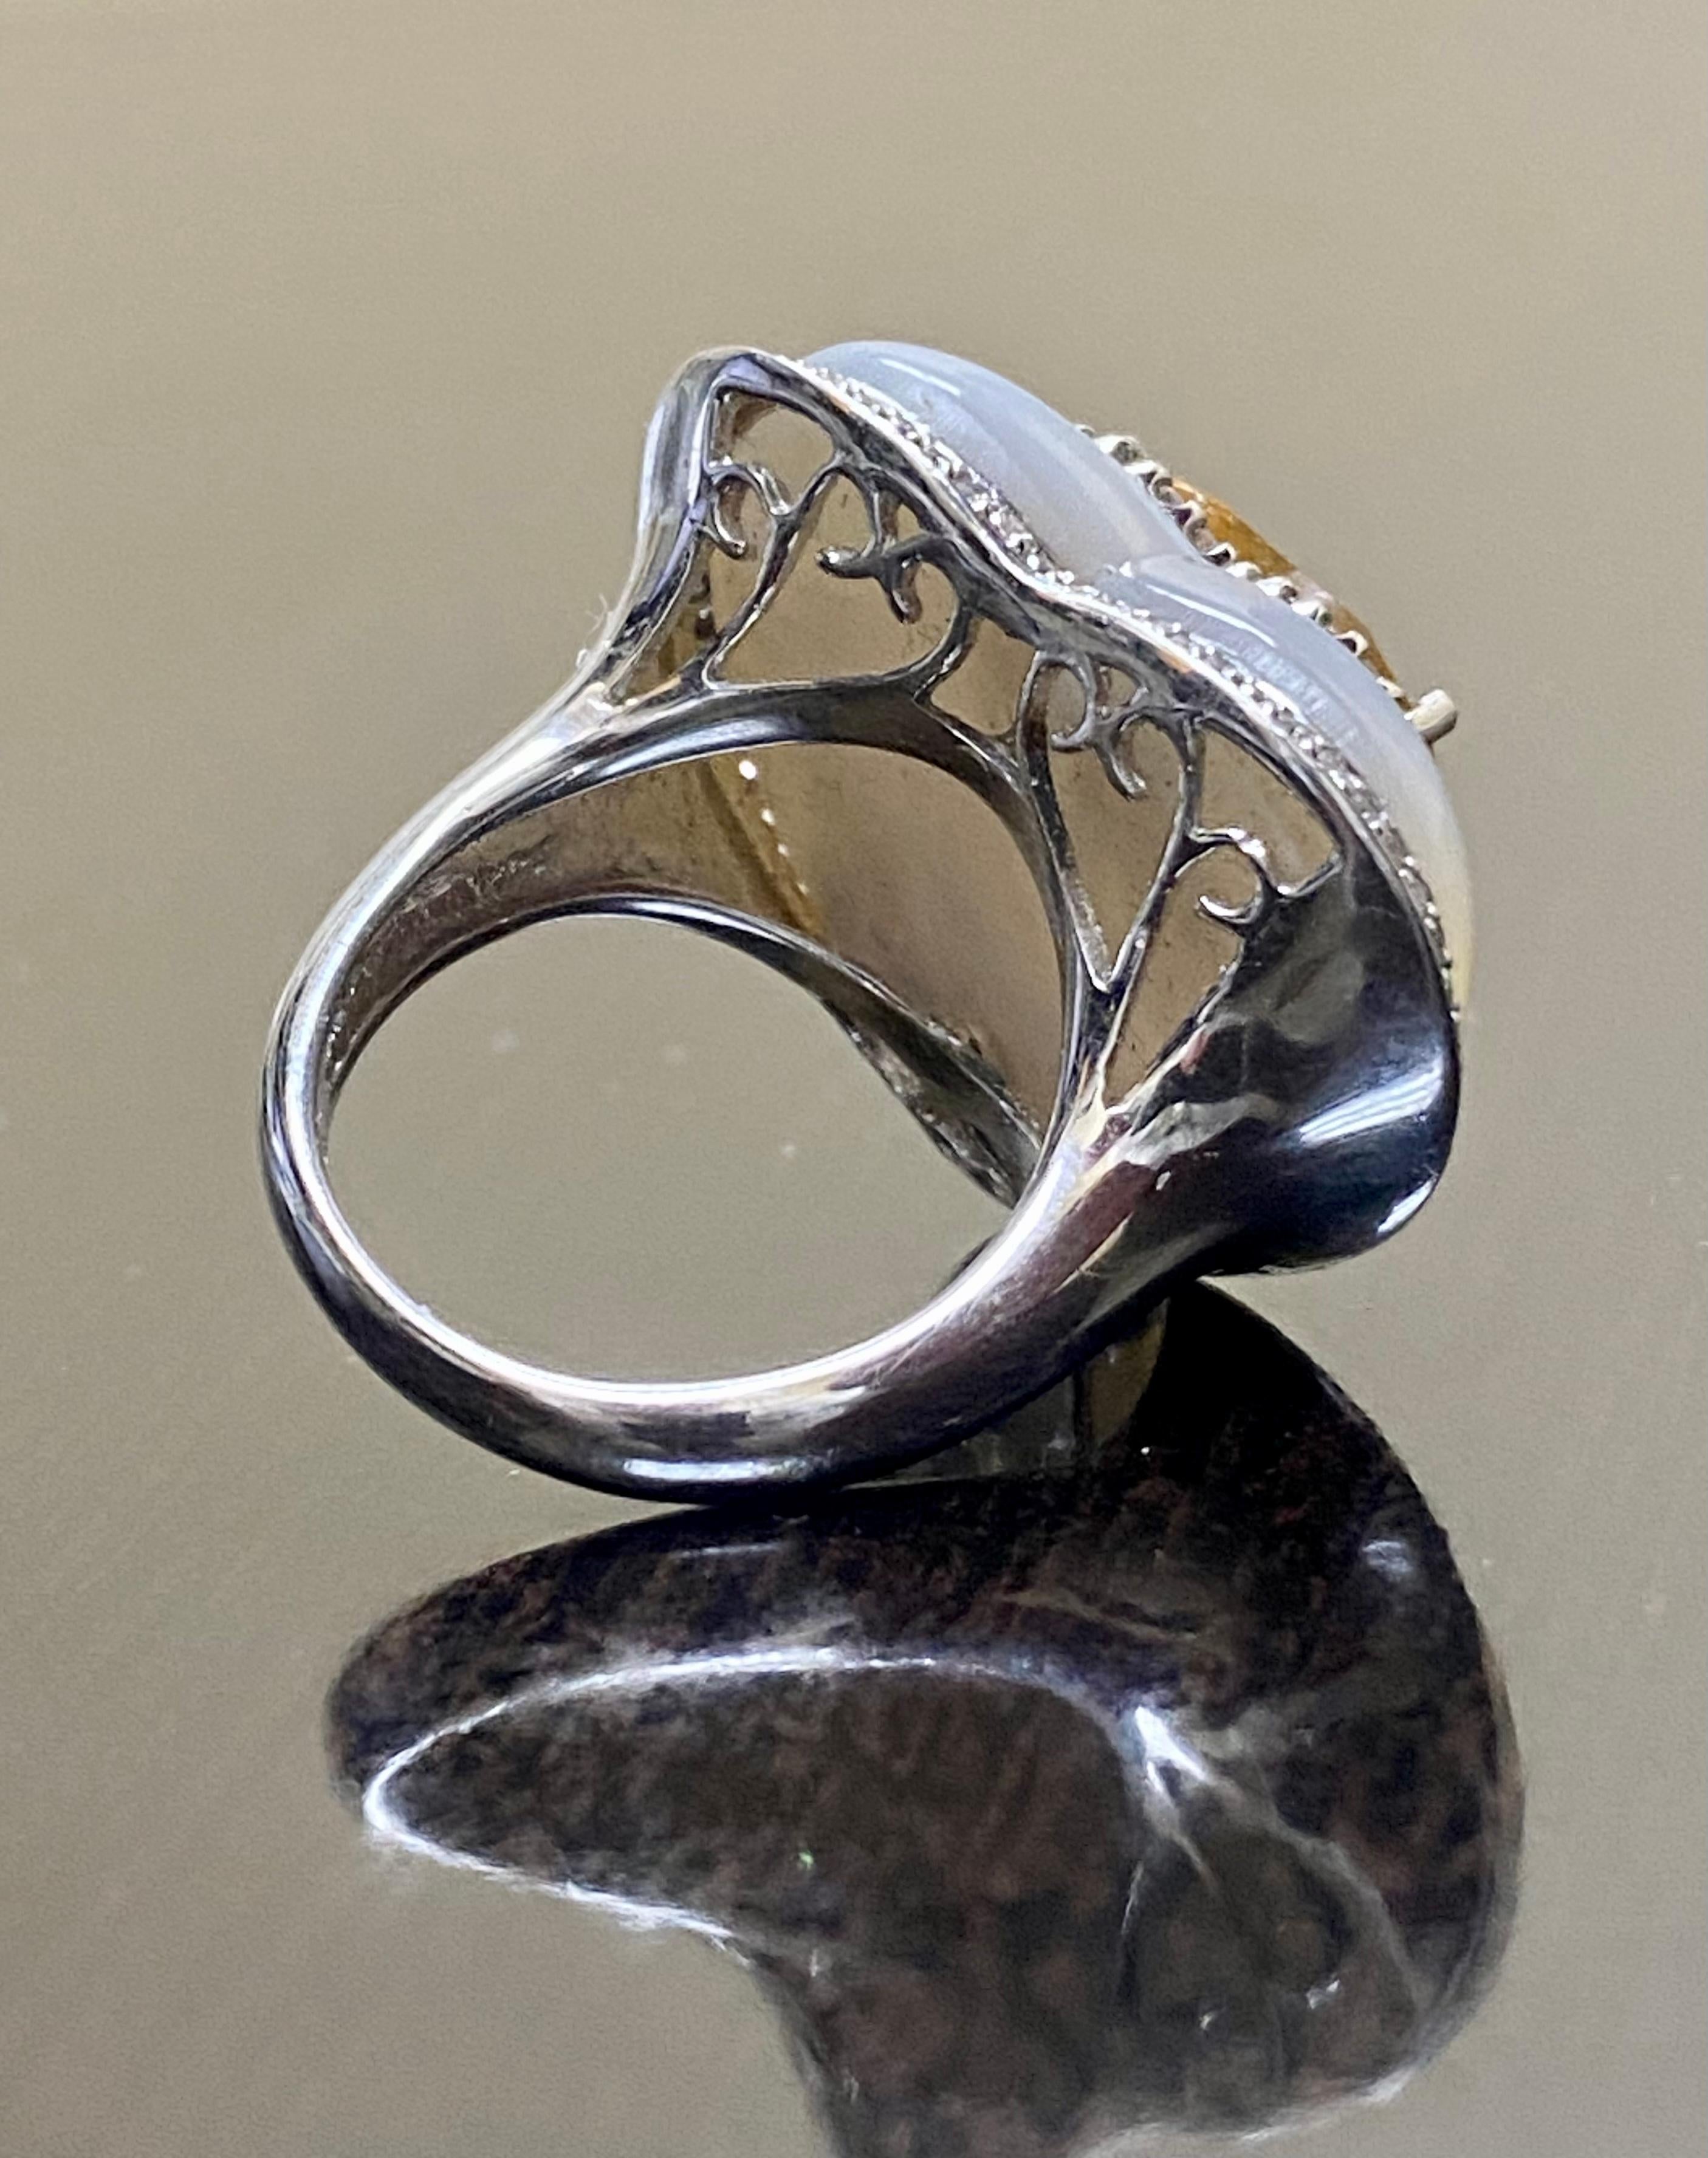 DeKara Design ONE OF A KIND COLLECTION

Metal-18K White Gold, .750.

Stones- Heart Shape Citrine 11.41 Carats, Heart Shape Mother of Pearl, 105 Round Diamonds F-G Color SI1 Clarity 0.50 Carats.

Here is your chance to have a piece of art on your